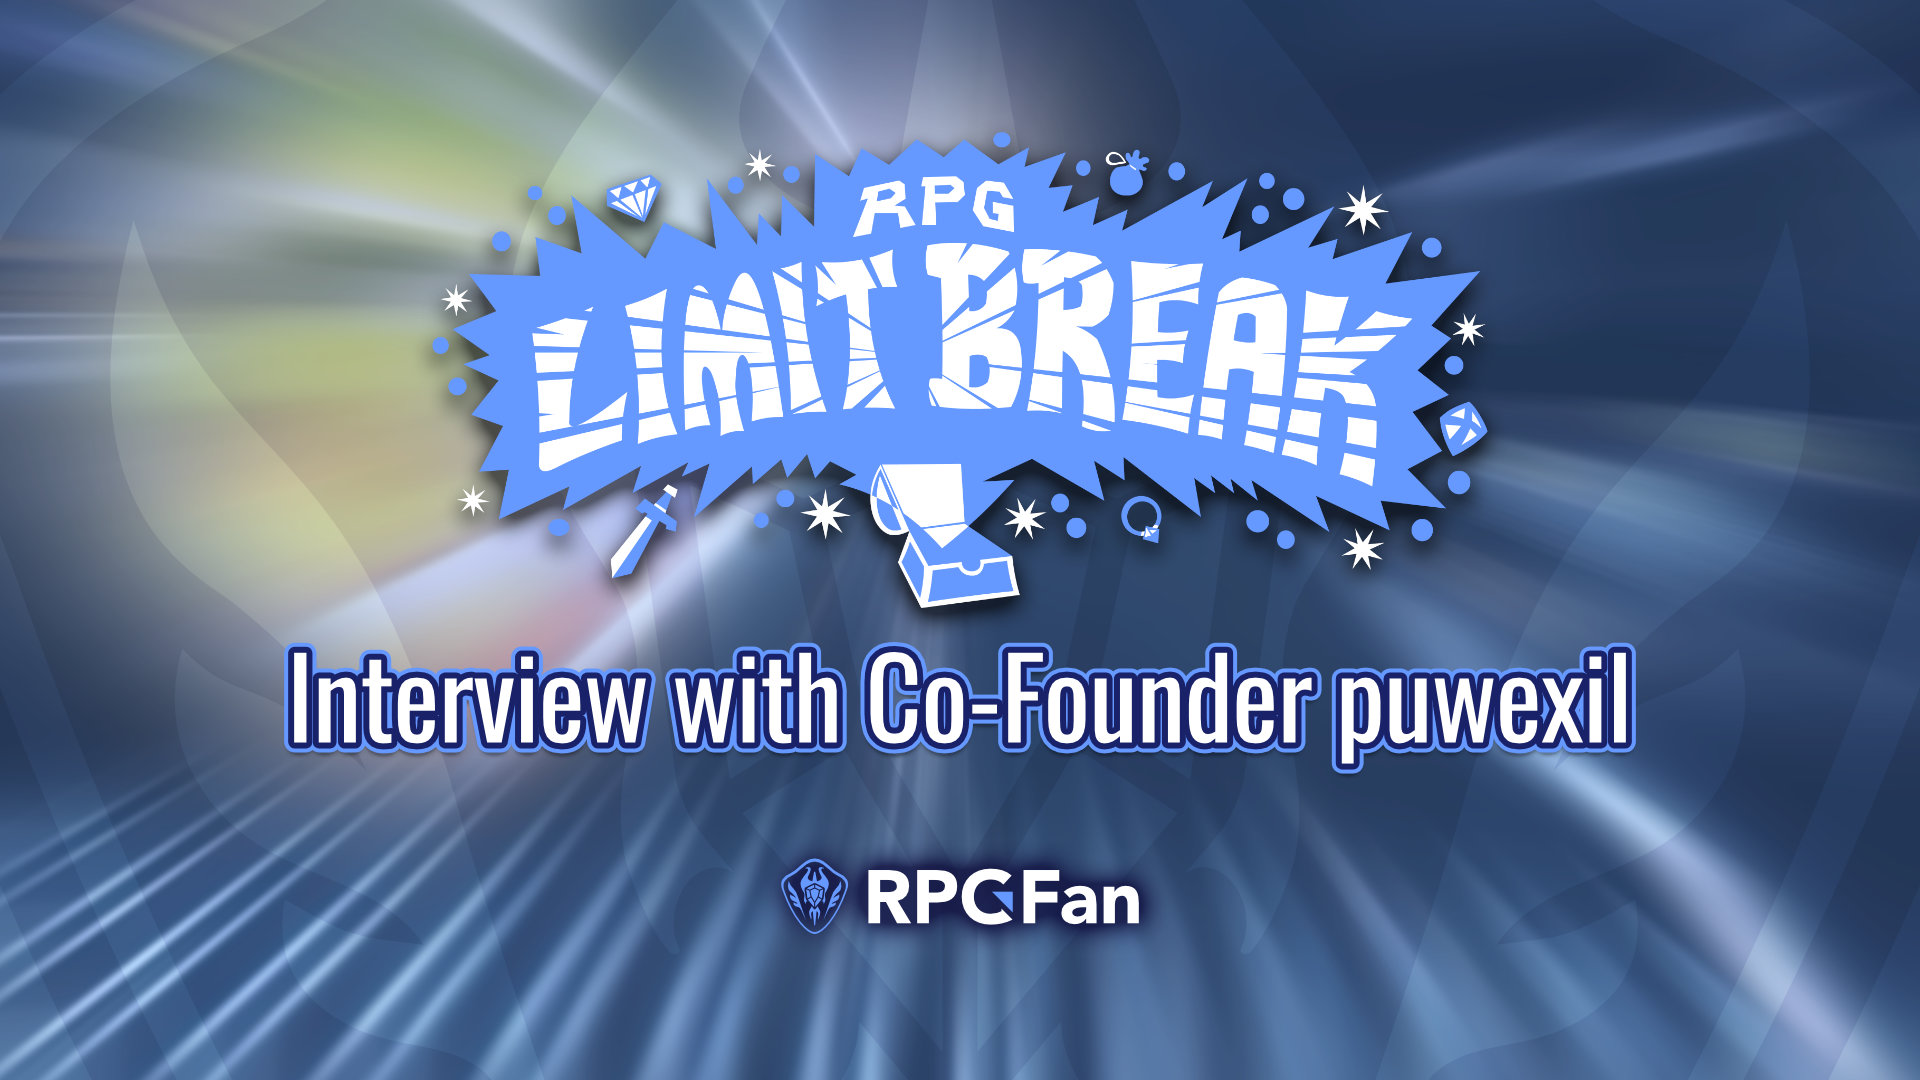 RPG Limit Break Interview with puwexil Featured